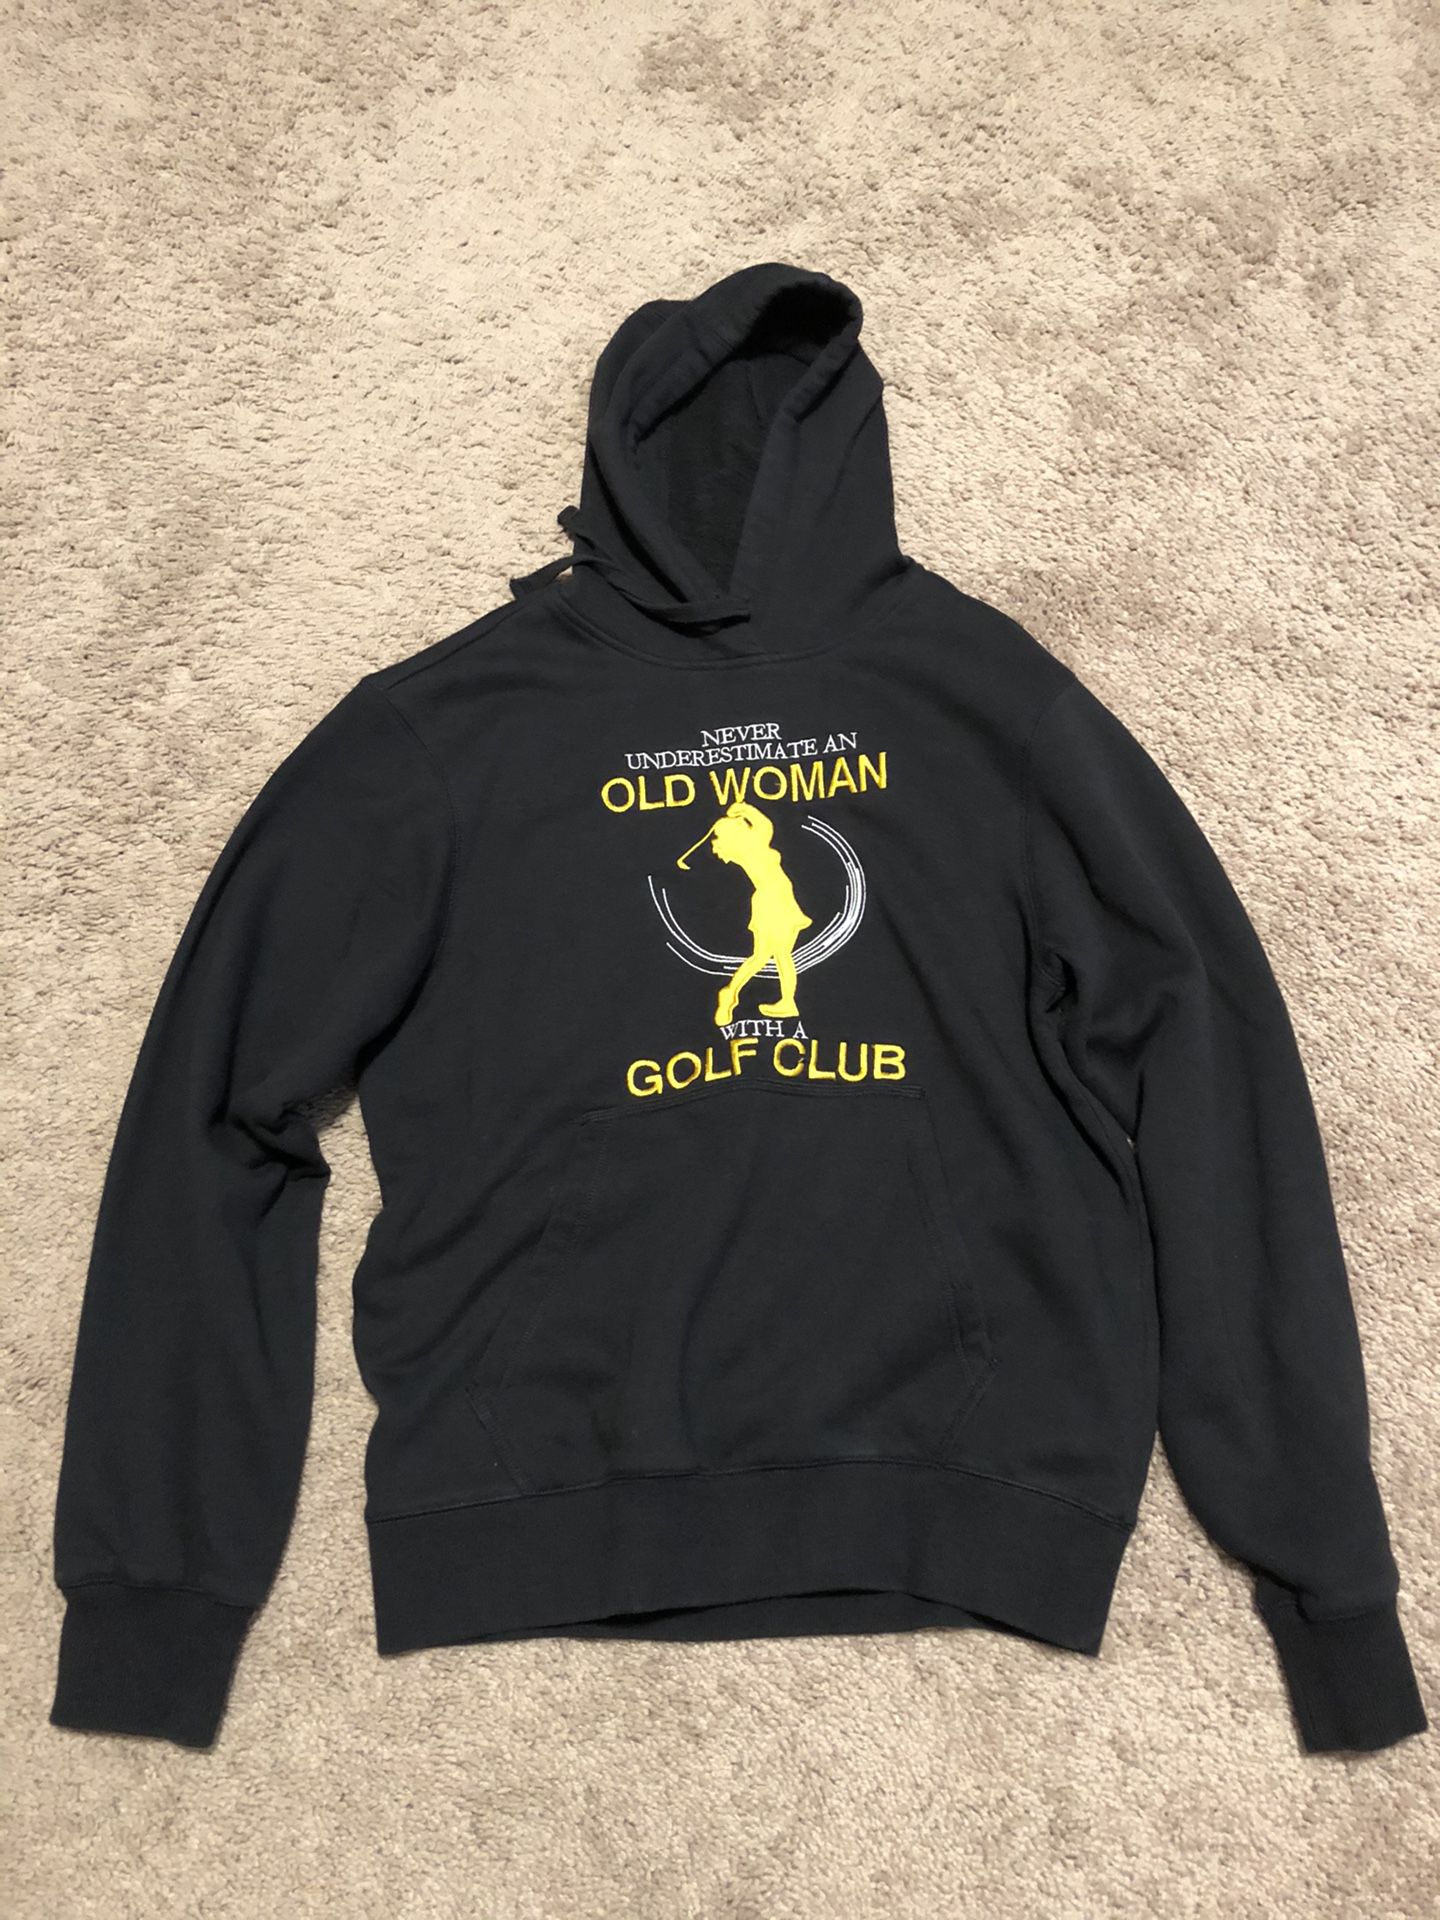 Ladies hooded sweatshirt . “Never Underestimate an Old Woman with a Golf Club”